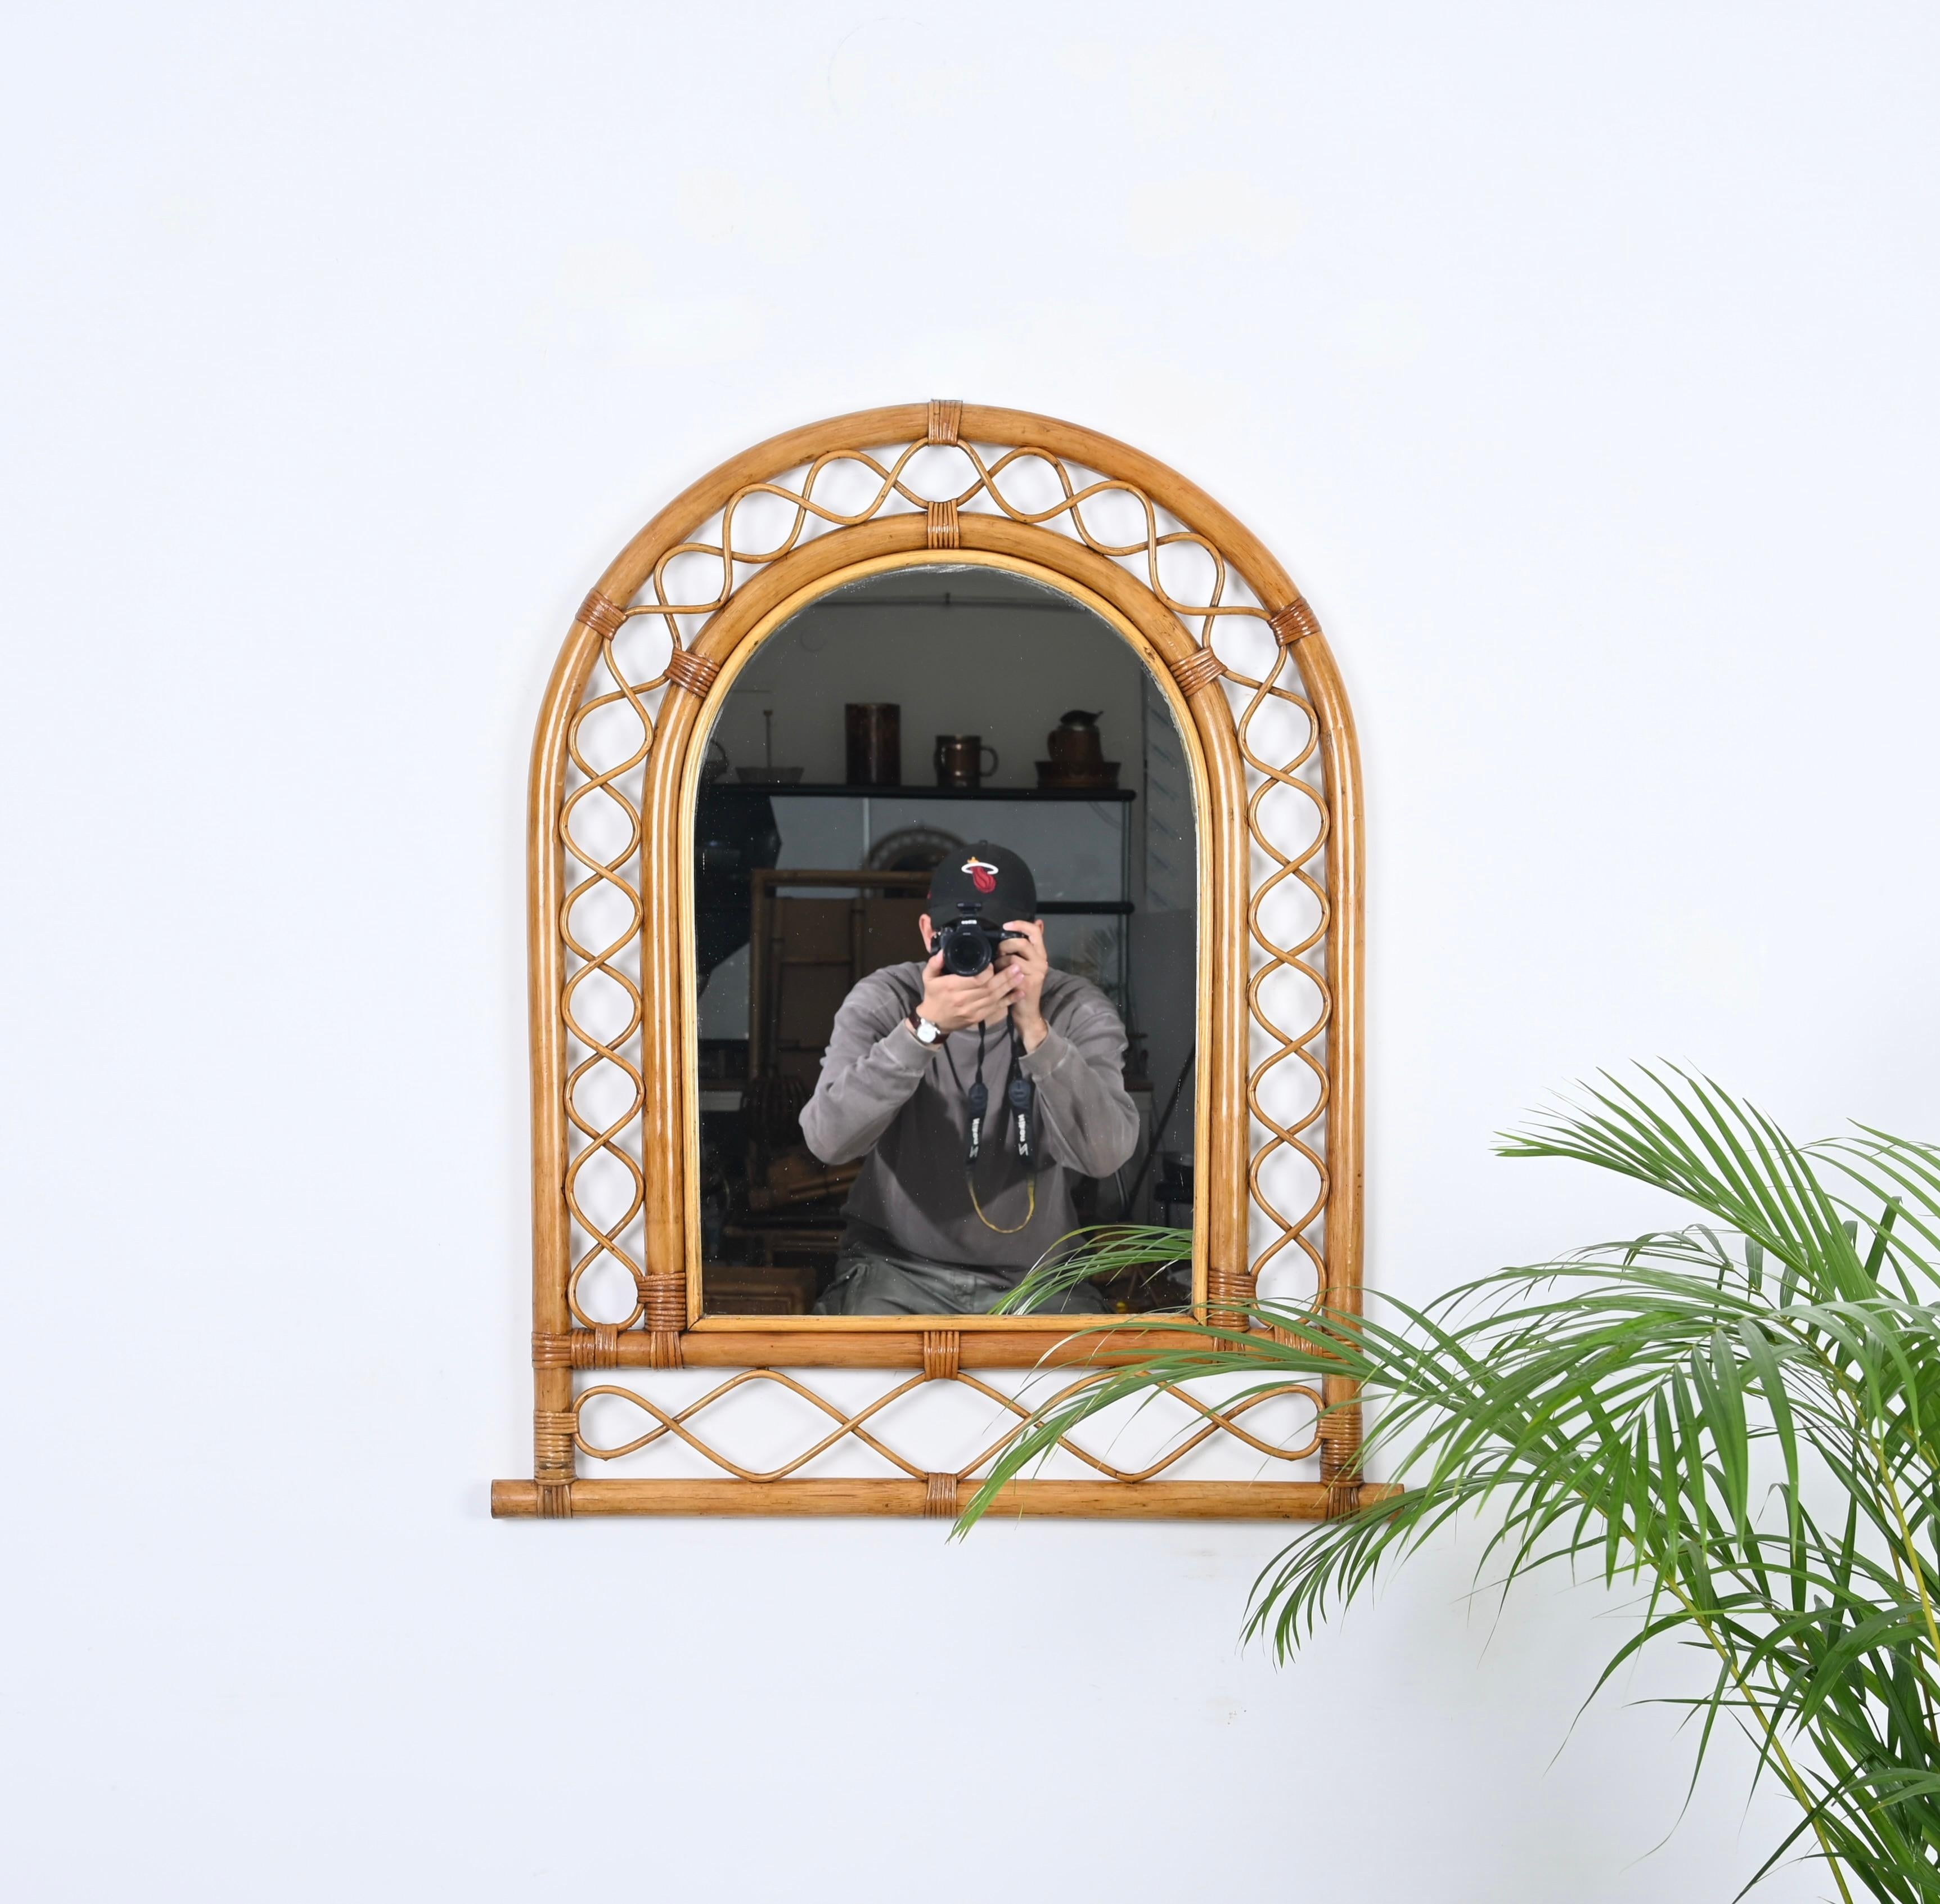 Marvellous Côte d'Azur style arch-shaped wall mirror in bamboo and rattan and wicker. This fantastic item was produced in Italy during the 1960s.

unning sinusoidal decorations in curved rattan in between them. The whole is enriched by hand-woven